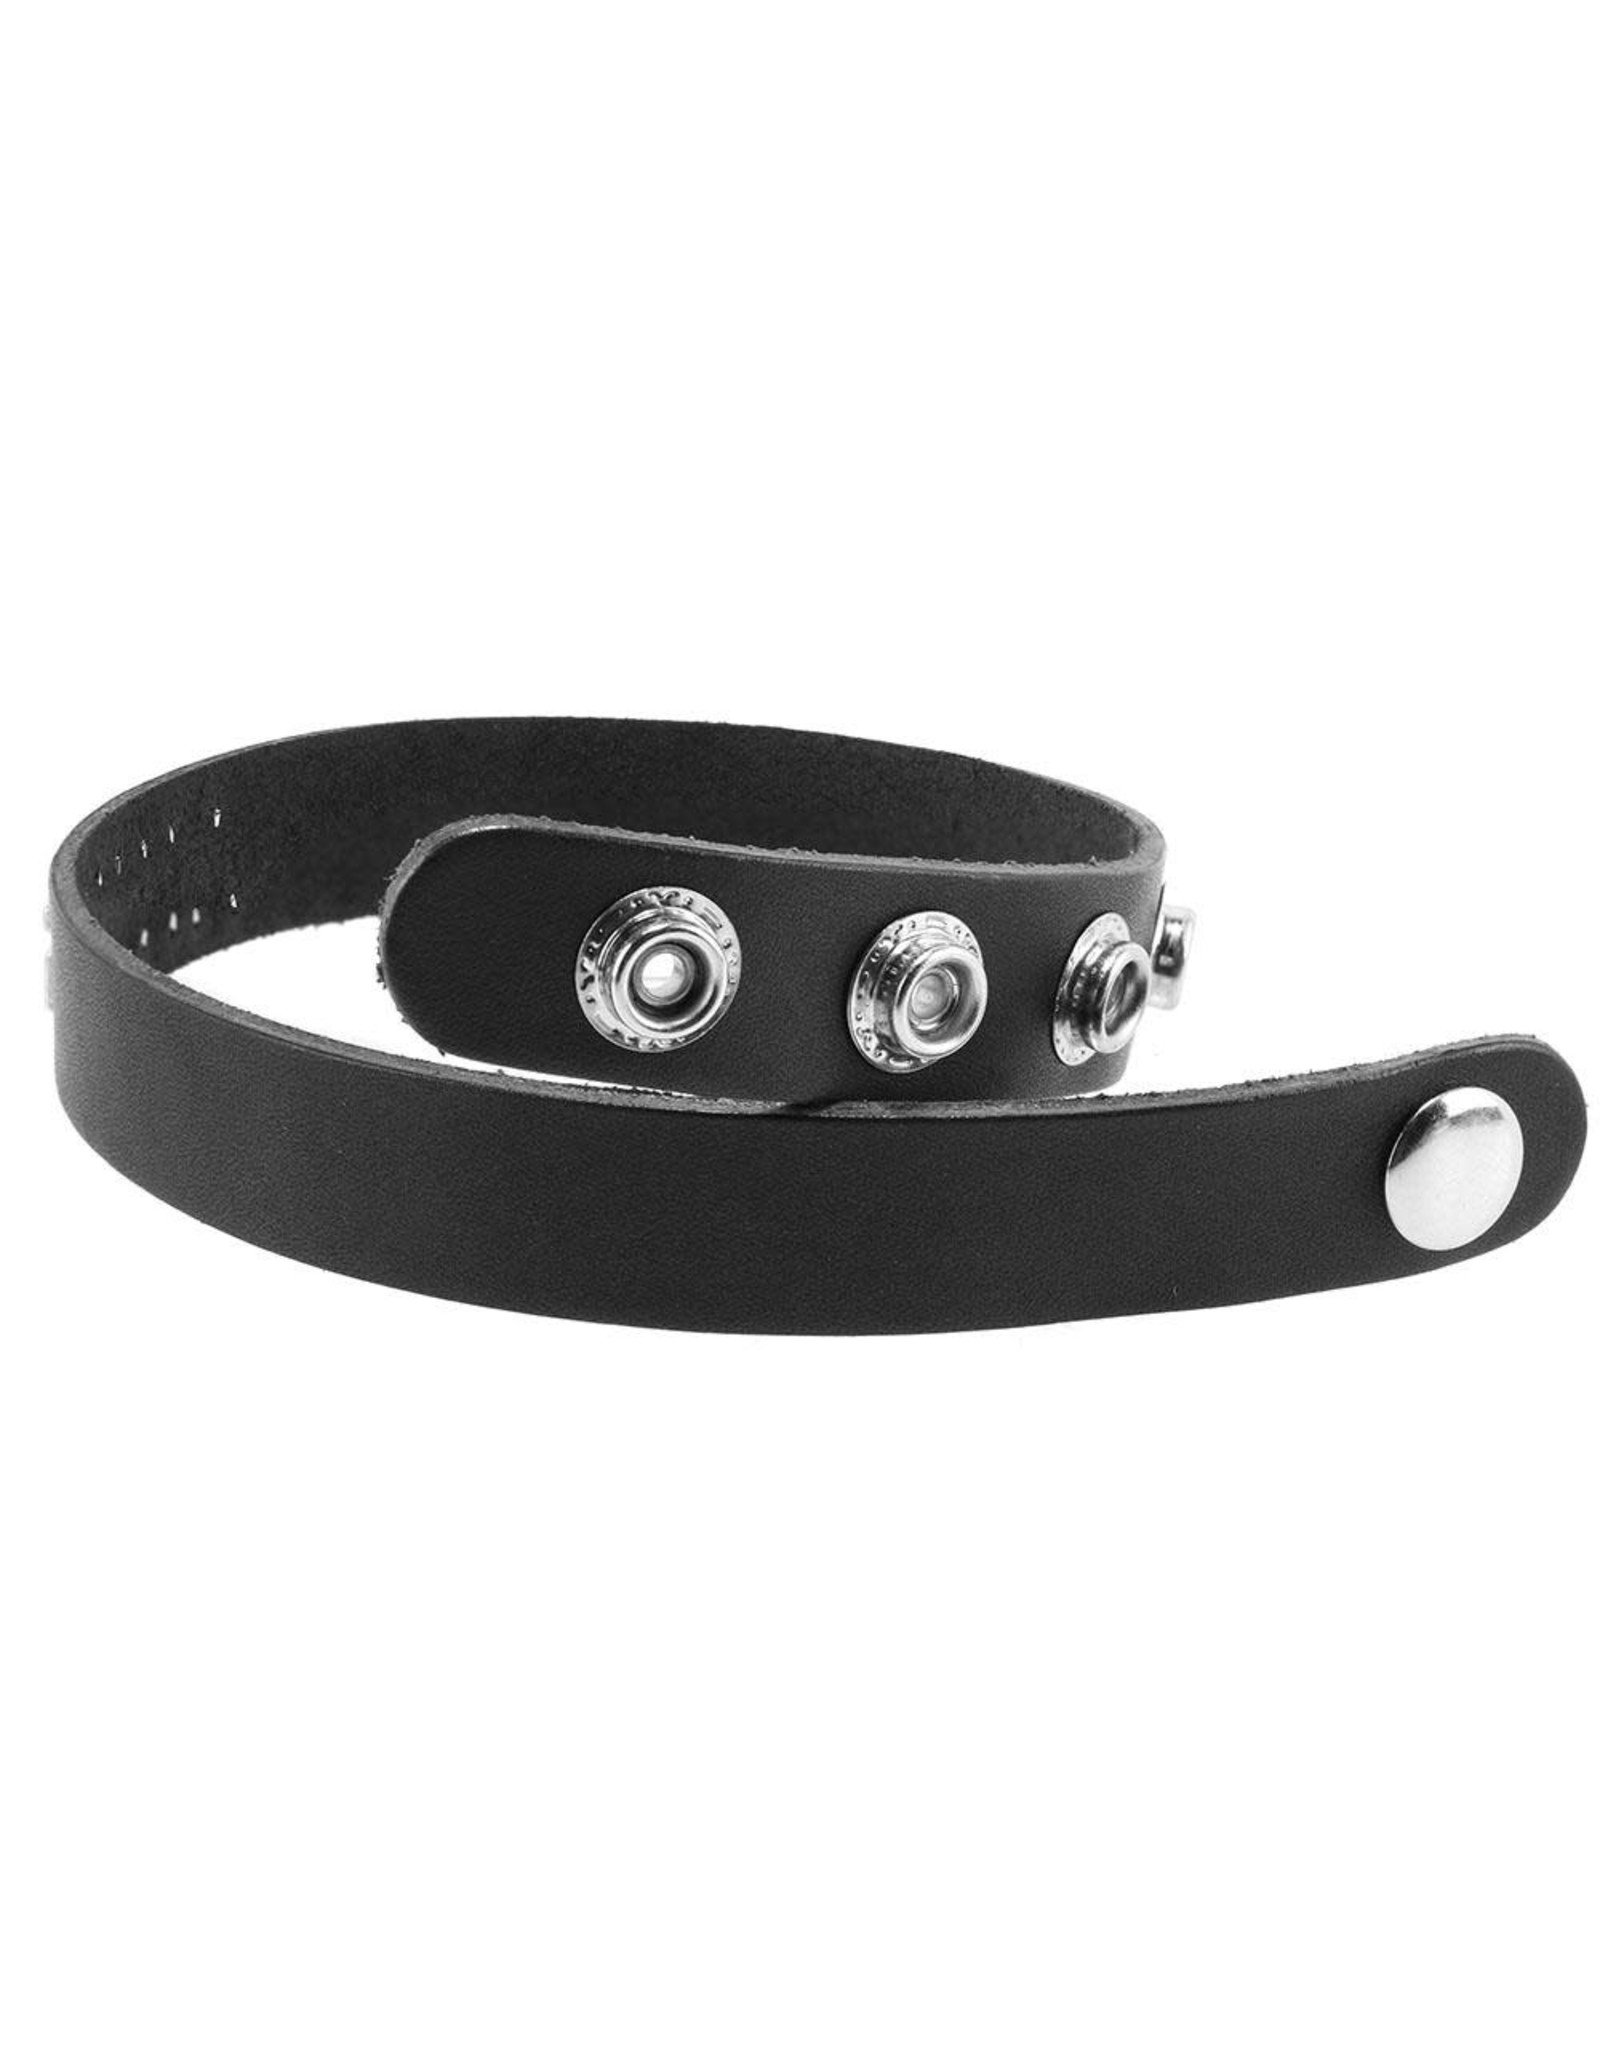 Spartacus Daddy's Girl Leather Word Band Collar